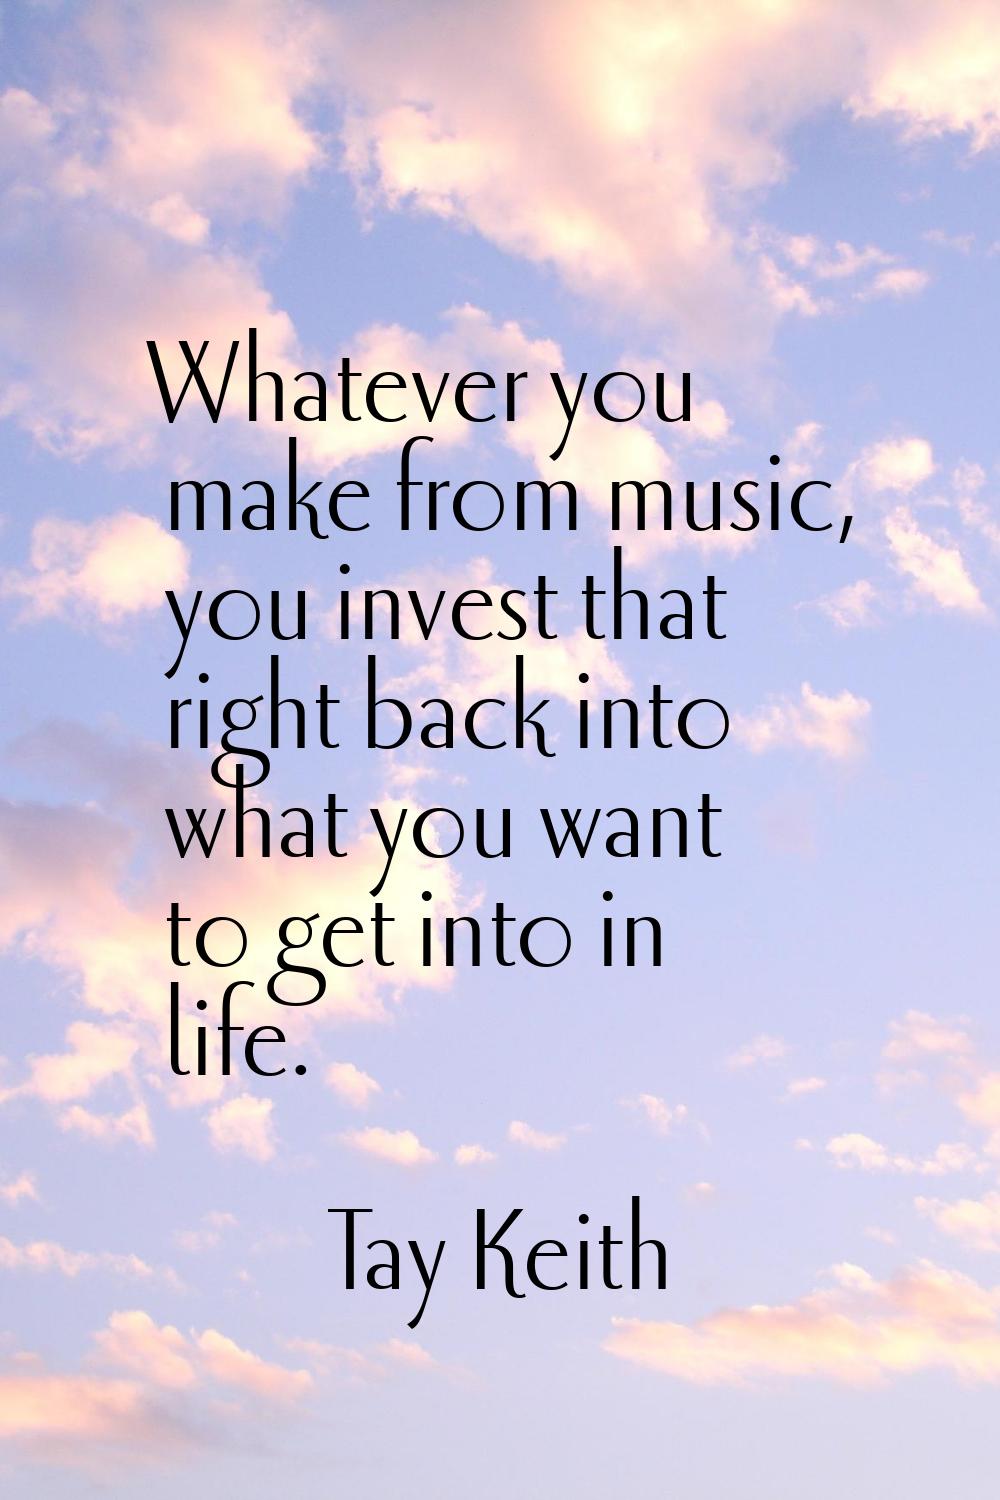 Whatever you make from music, you invest that right back into what you want to get into in life.